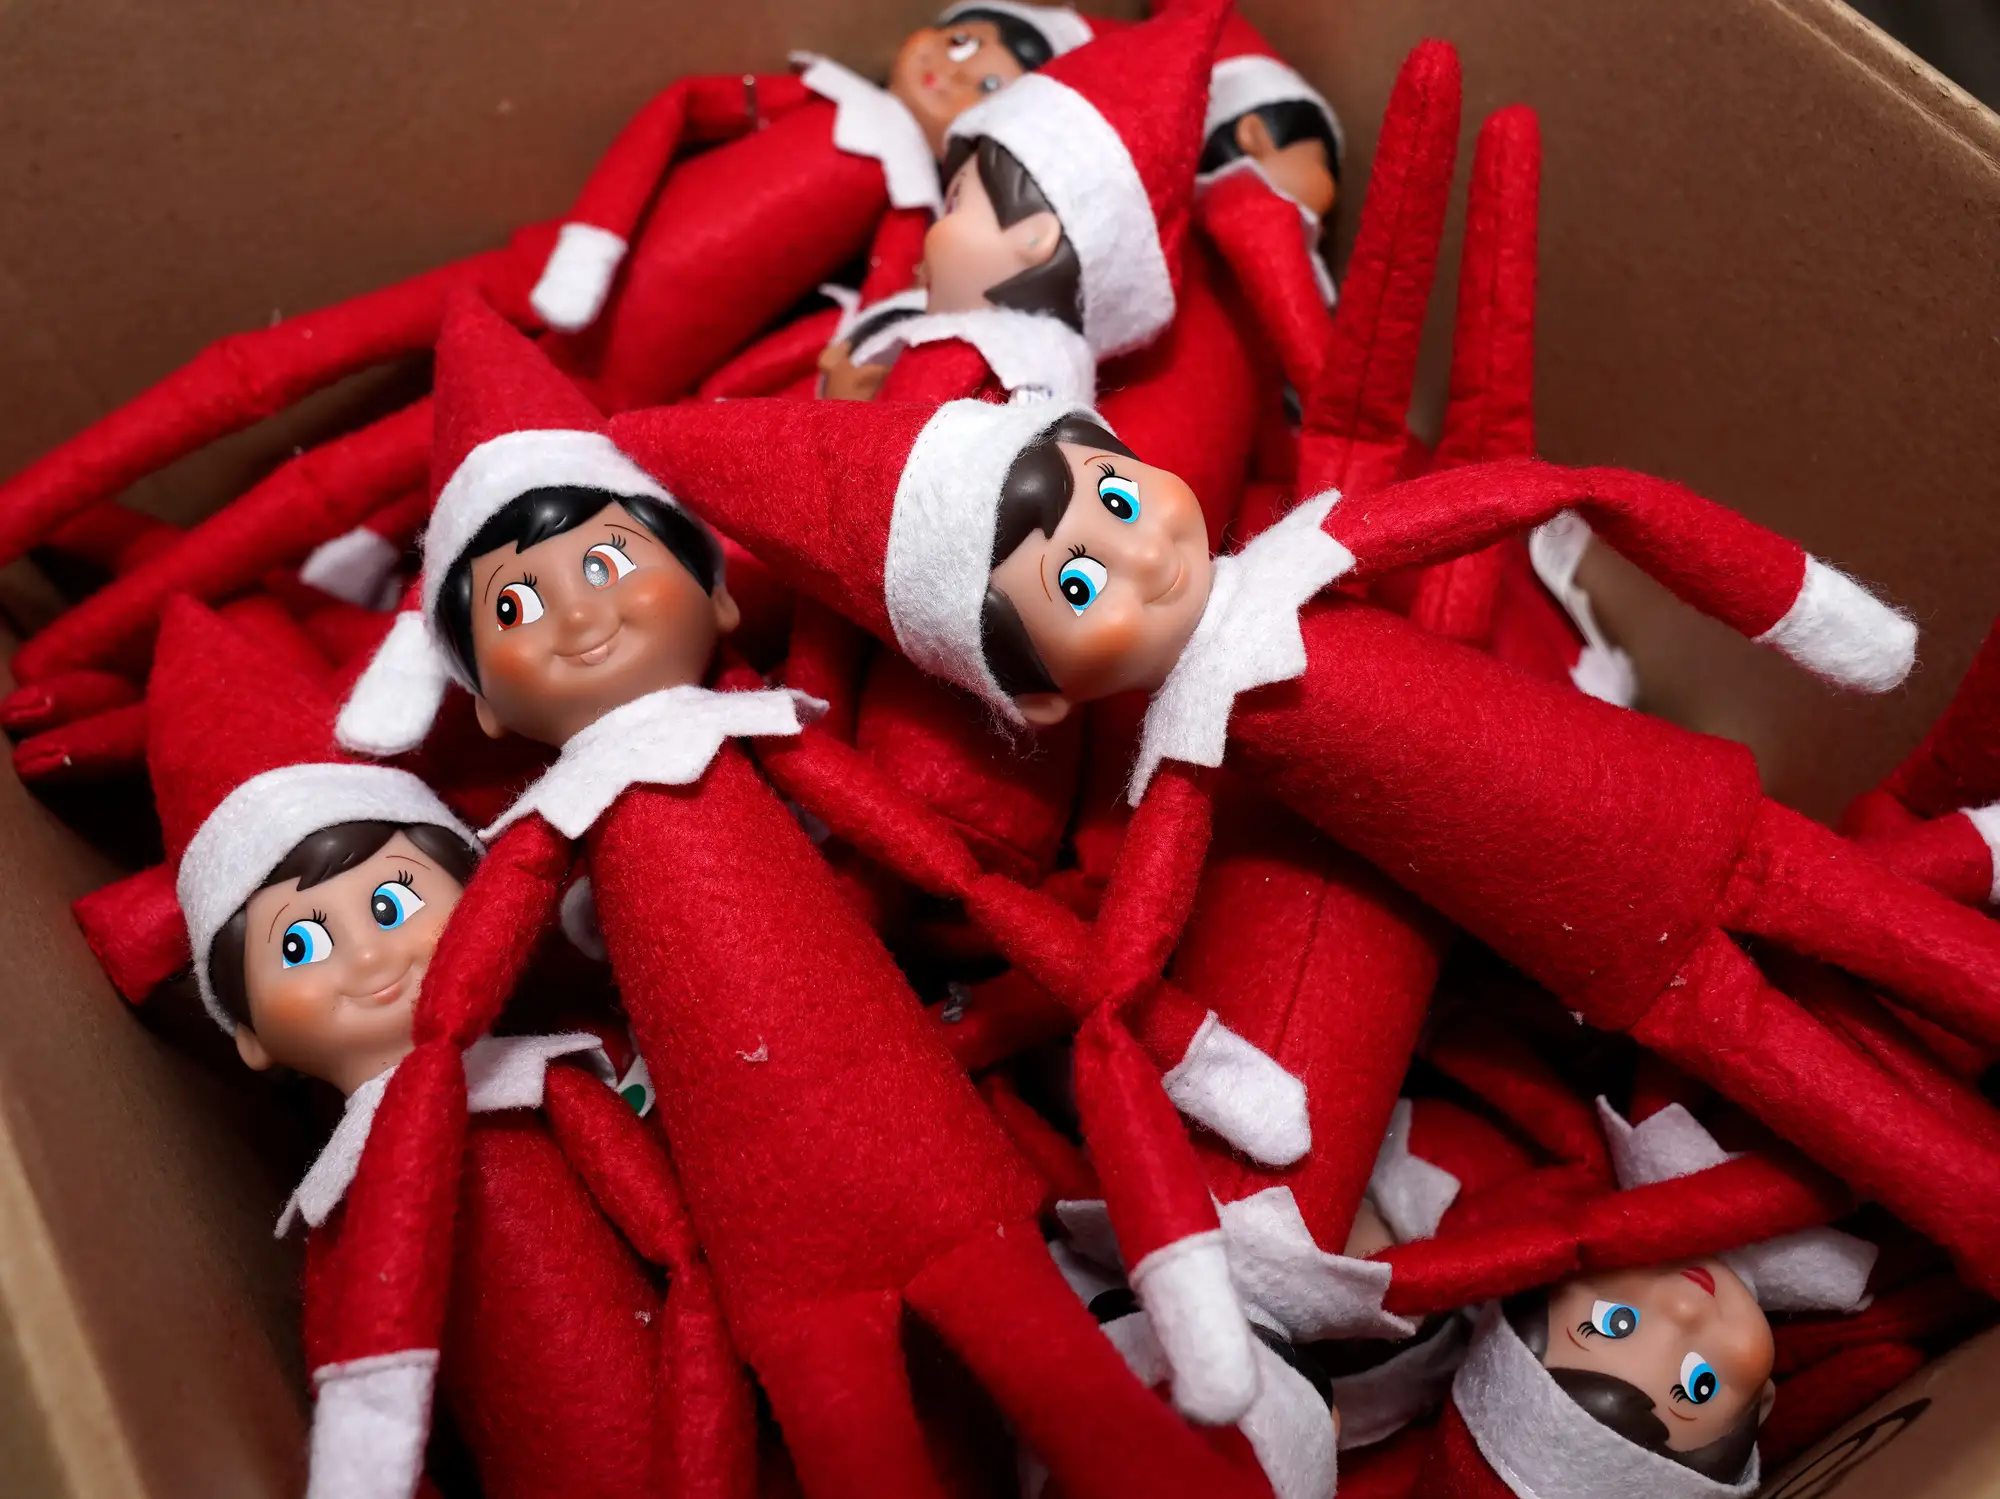 Elf on the Shelf figures are piled in a box